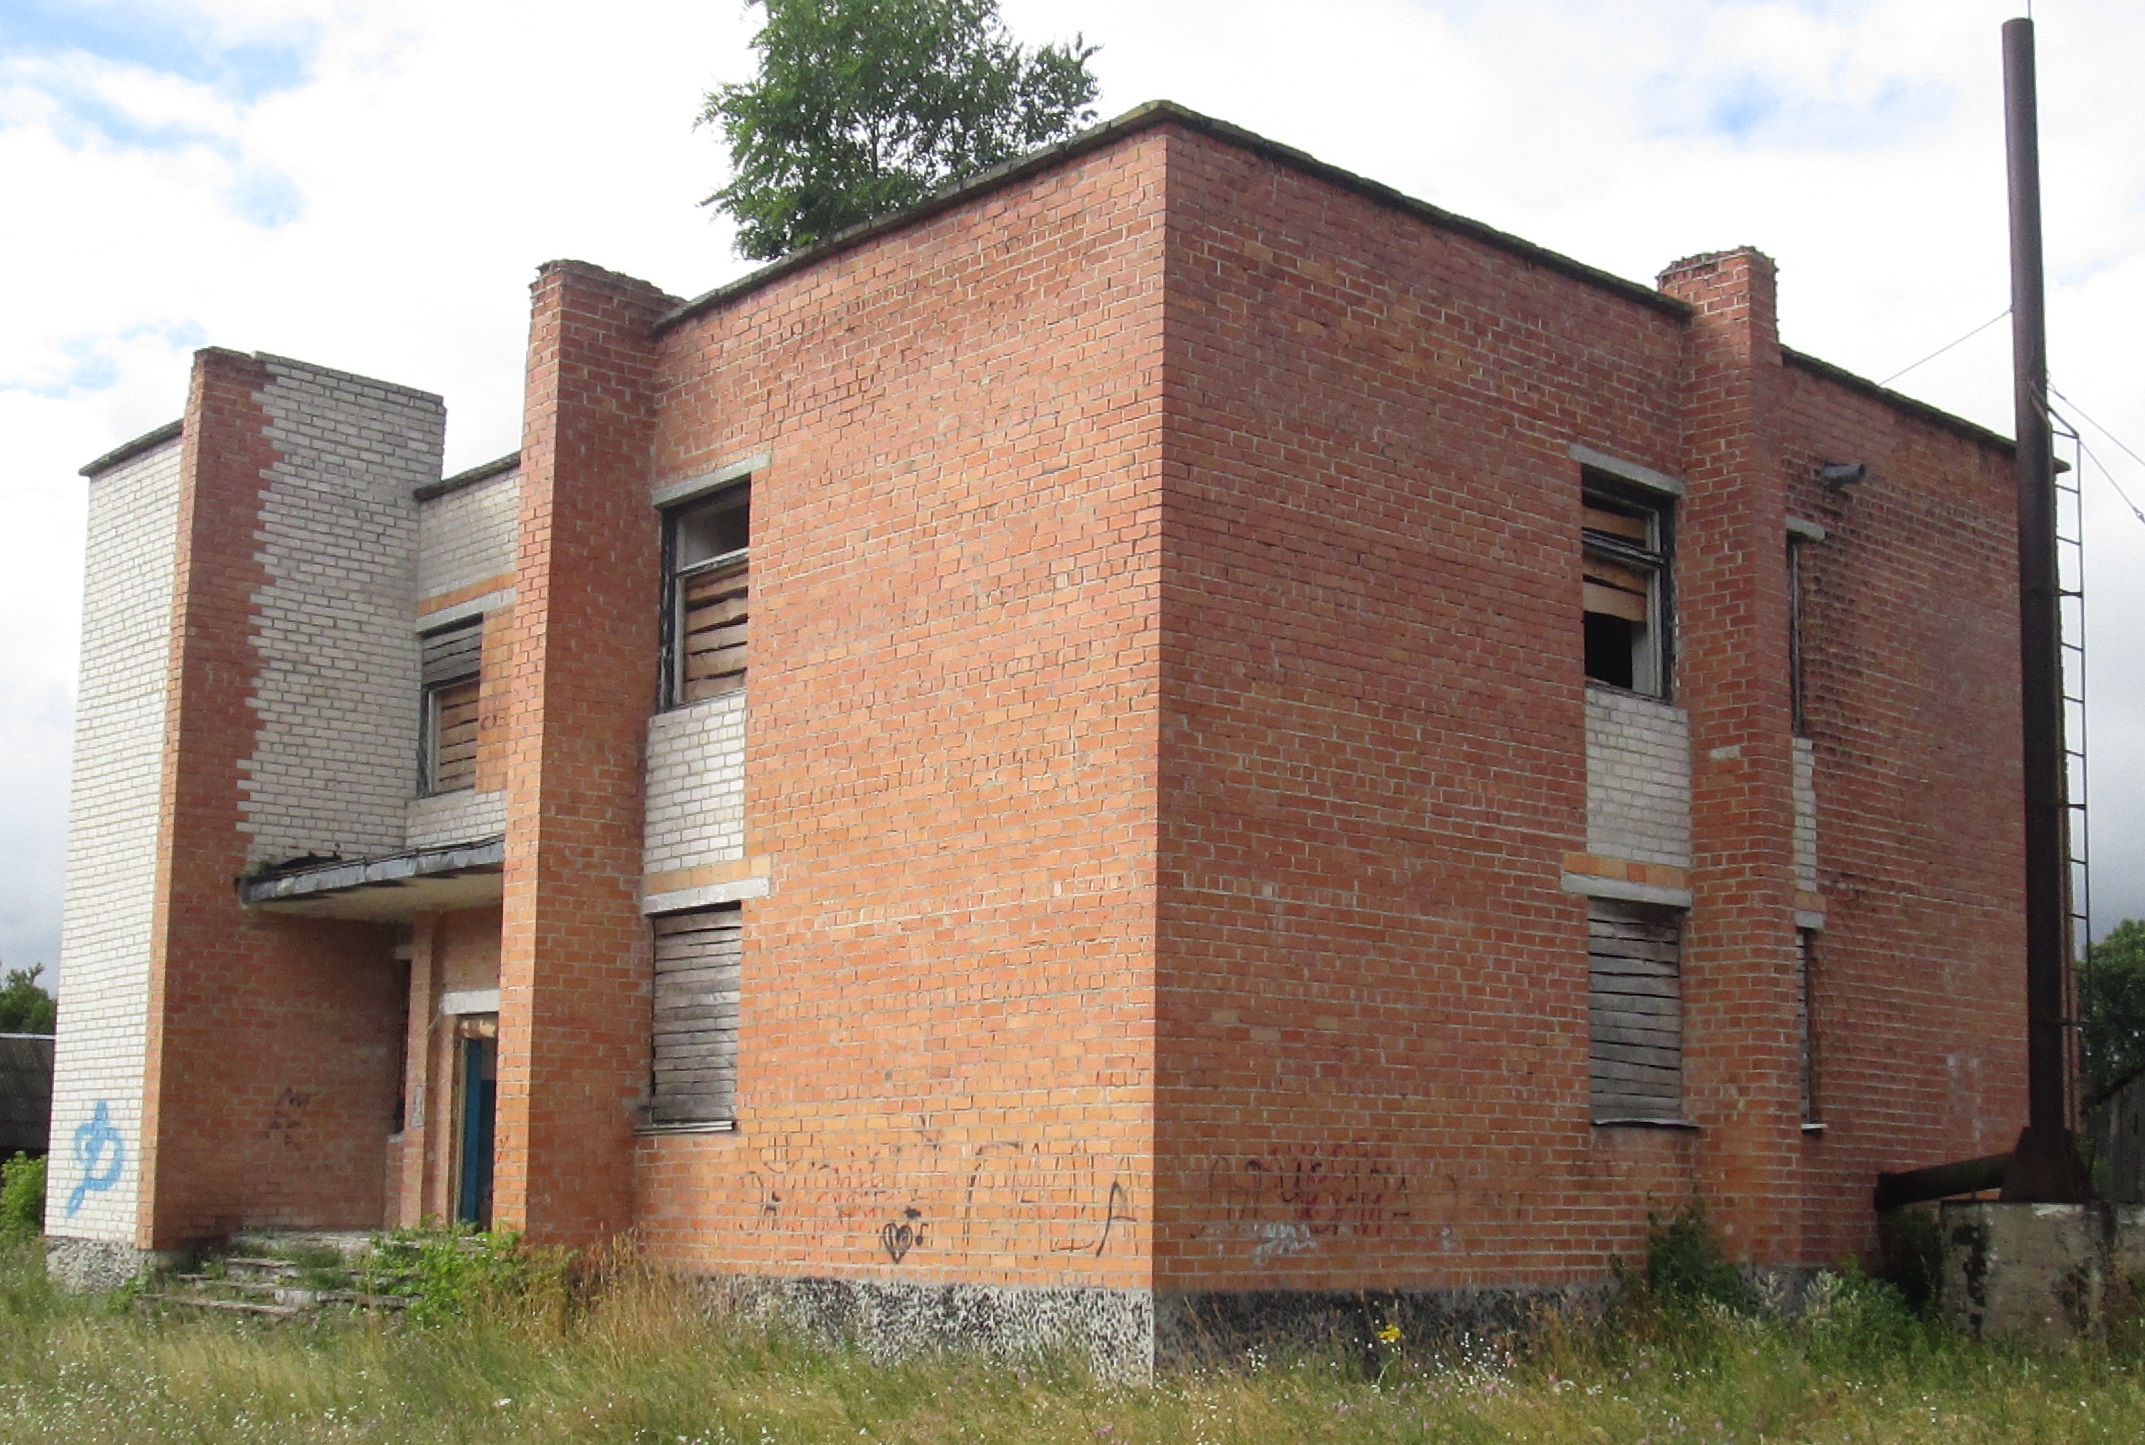 The building of the former "House of consumer services"